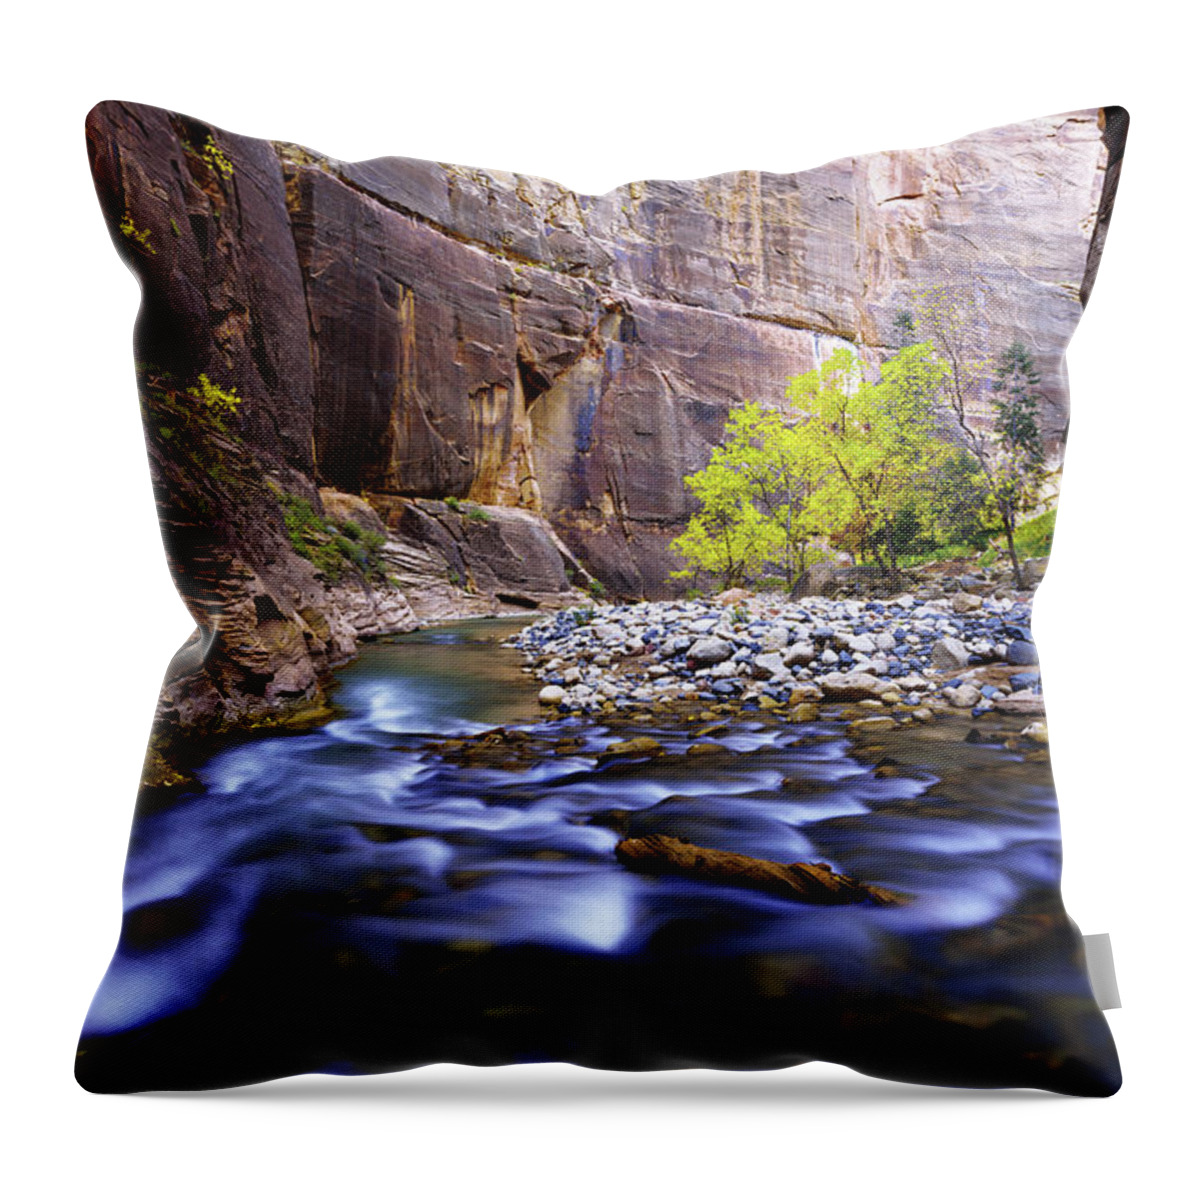 Dynamic Zion Throw Pillow featuring the photograph Dynamic Zion by Chad Dutson